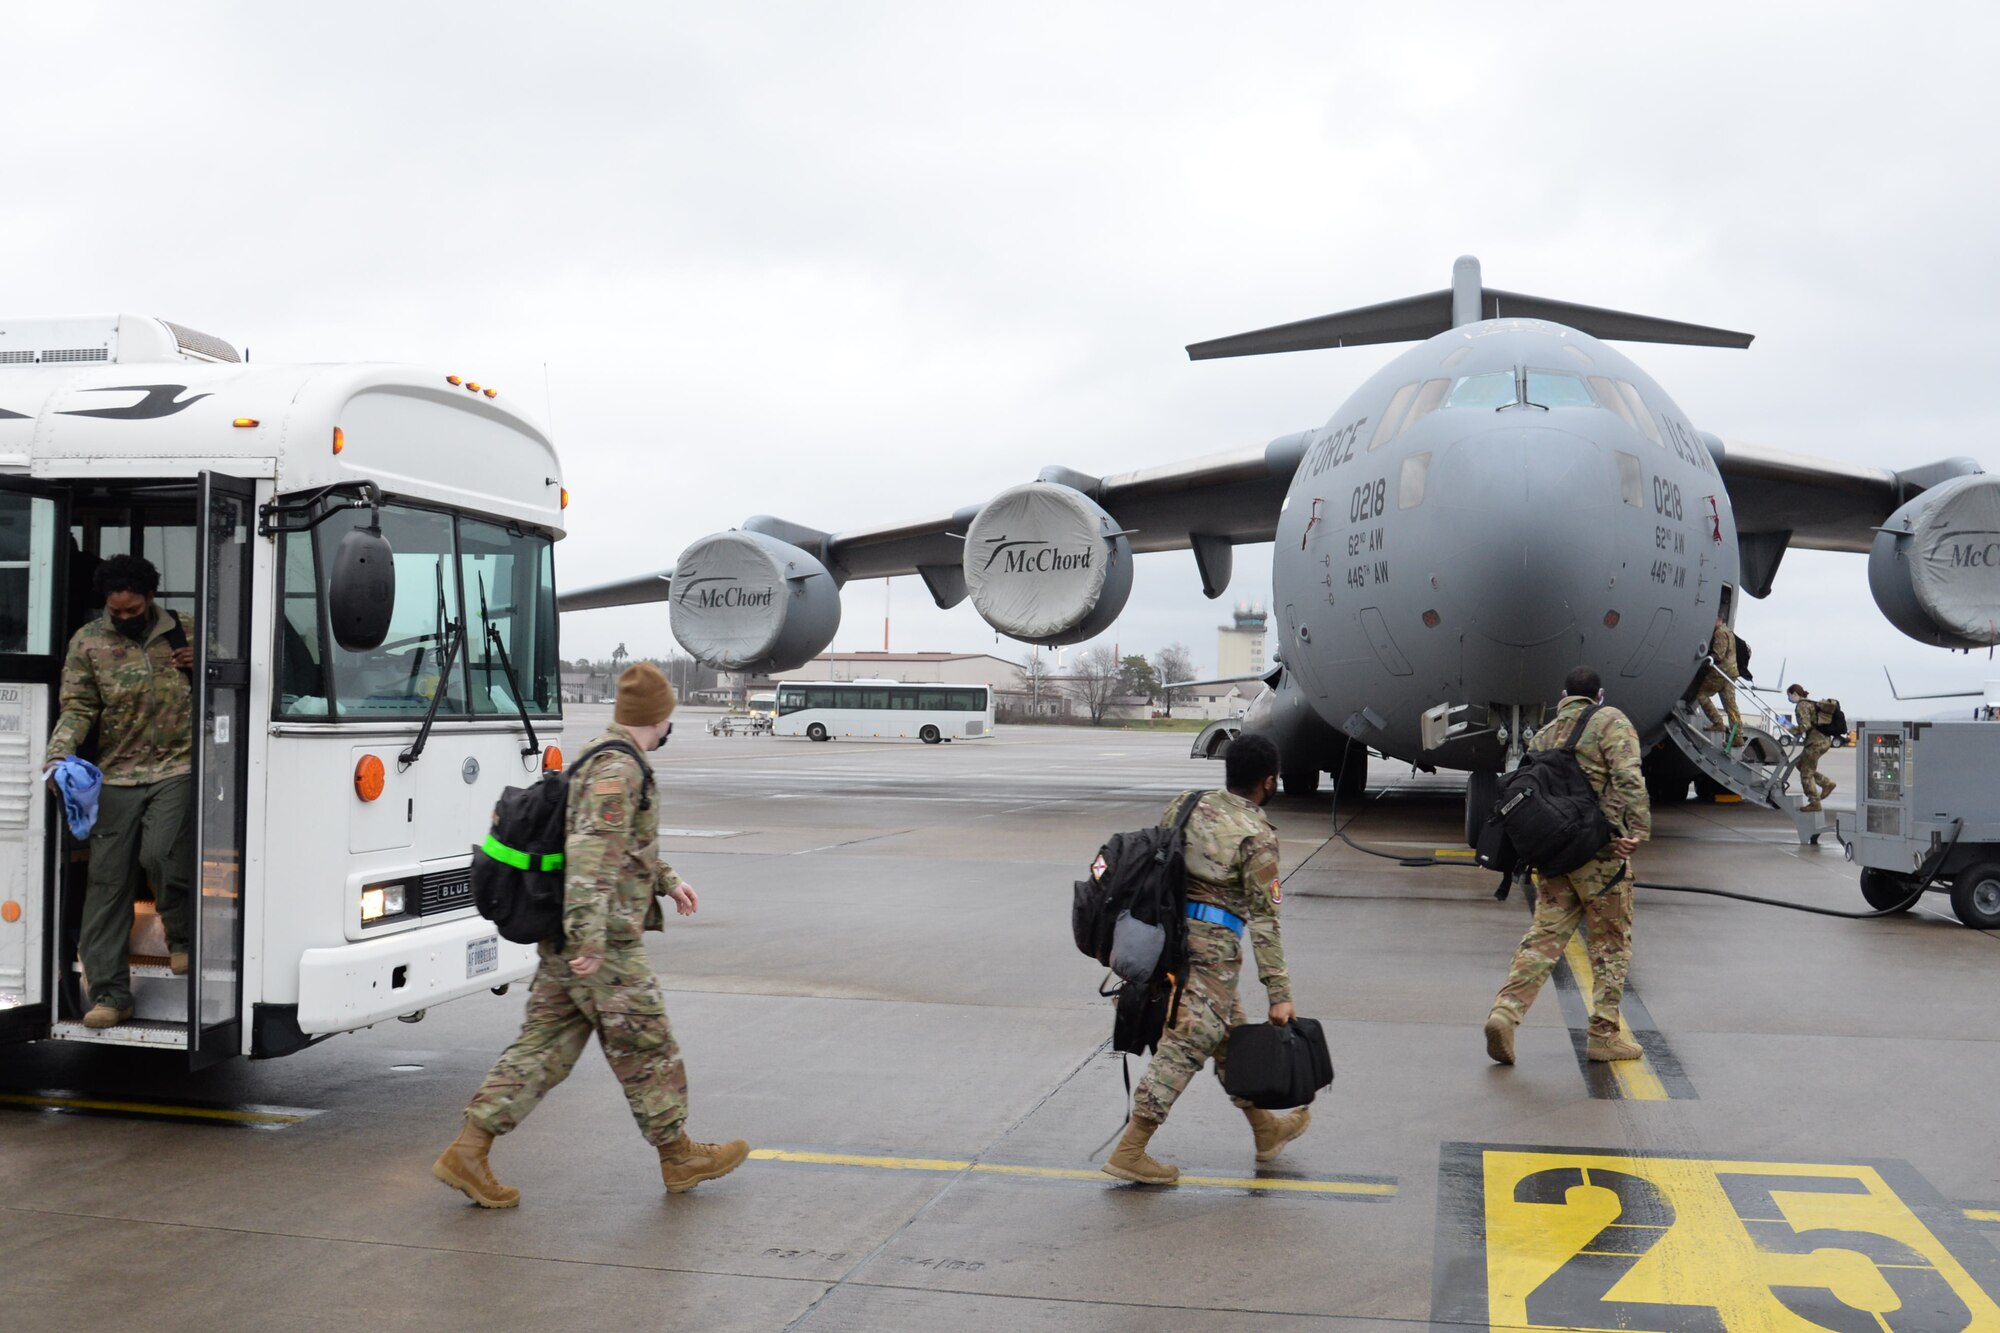 U.S. Air Force Airmen assigned to the 10th Expeditionary Aeromedical Evacuation Flight disembark from a bus and enter a C-17 Globemaster III aircraft for a training at Ramstein Air Base, Germany, Jan. 26, 2021.